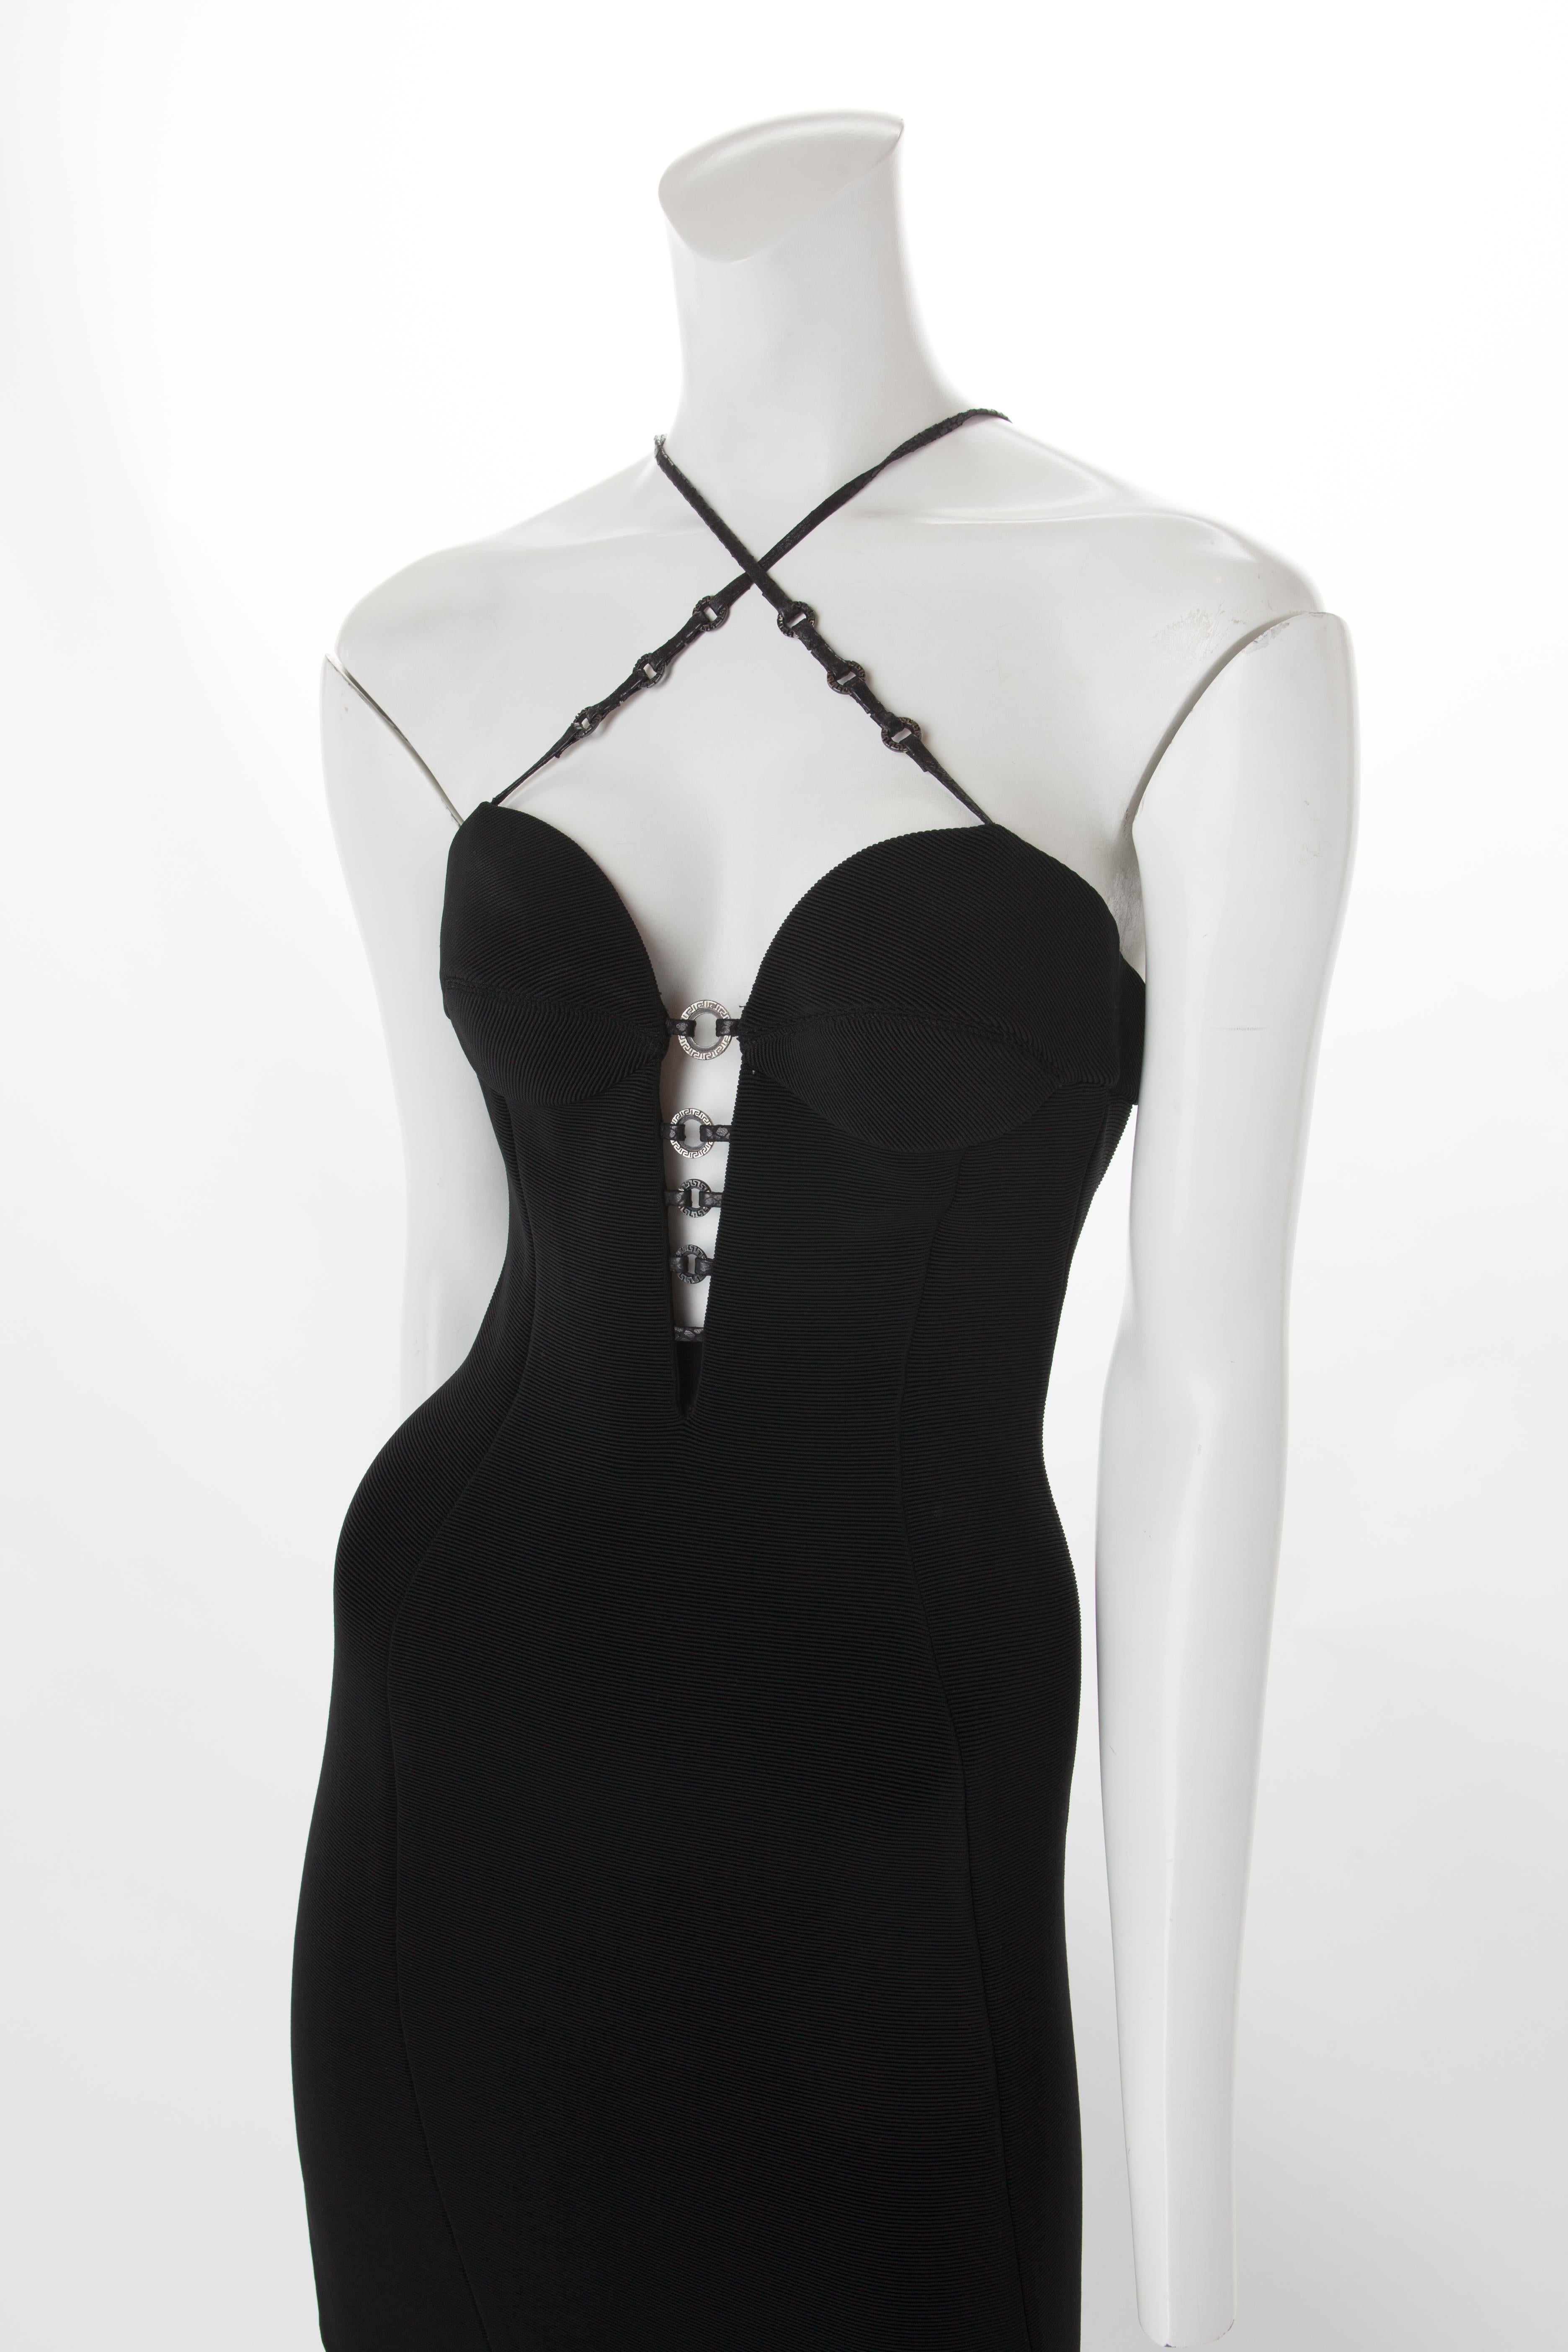 Gianni Versace Couture Long Black Bodycon Dress with Metal Ring Detail, 1995.
Cups at bust in self-fabric with graduated branded metal rings to create a plunging 